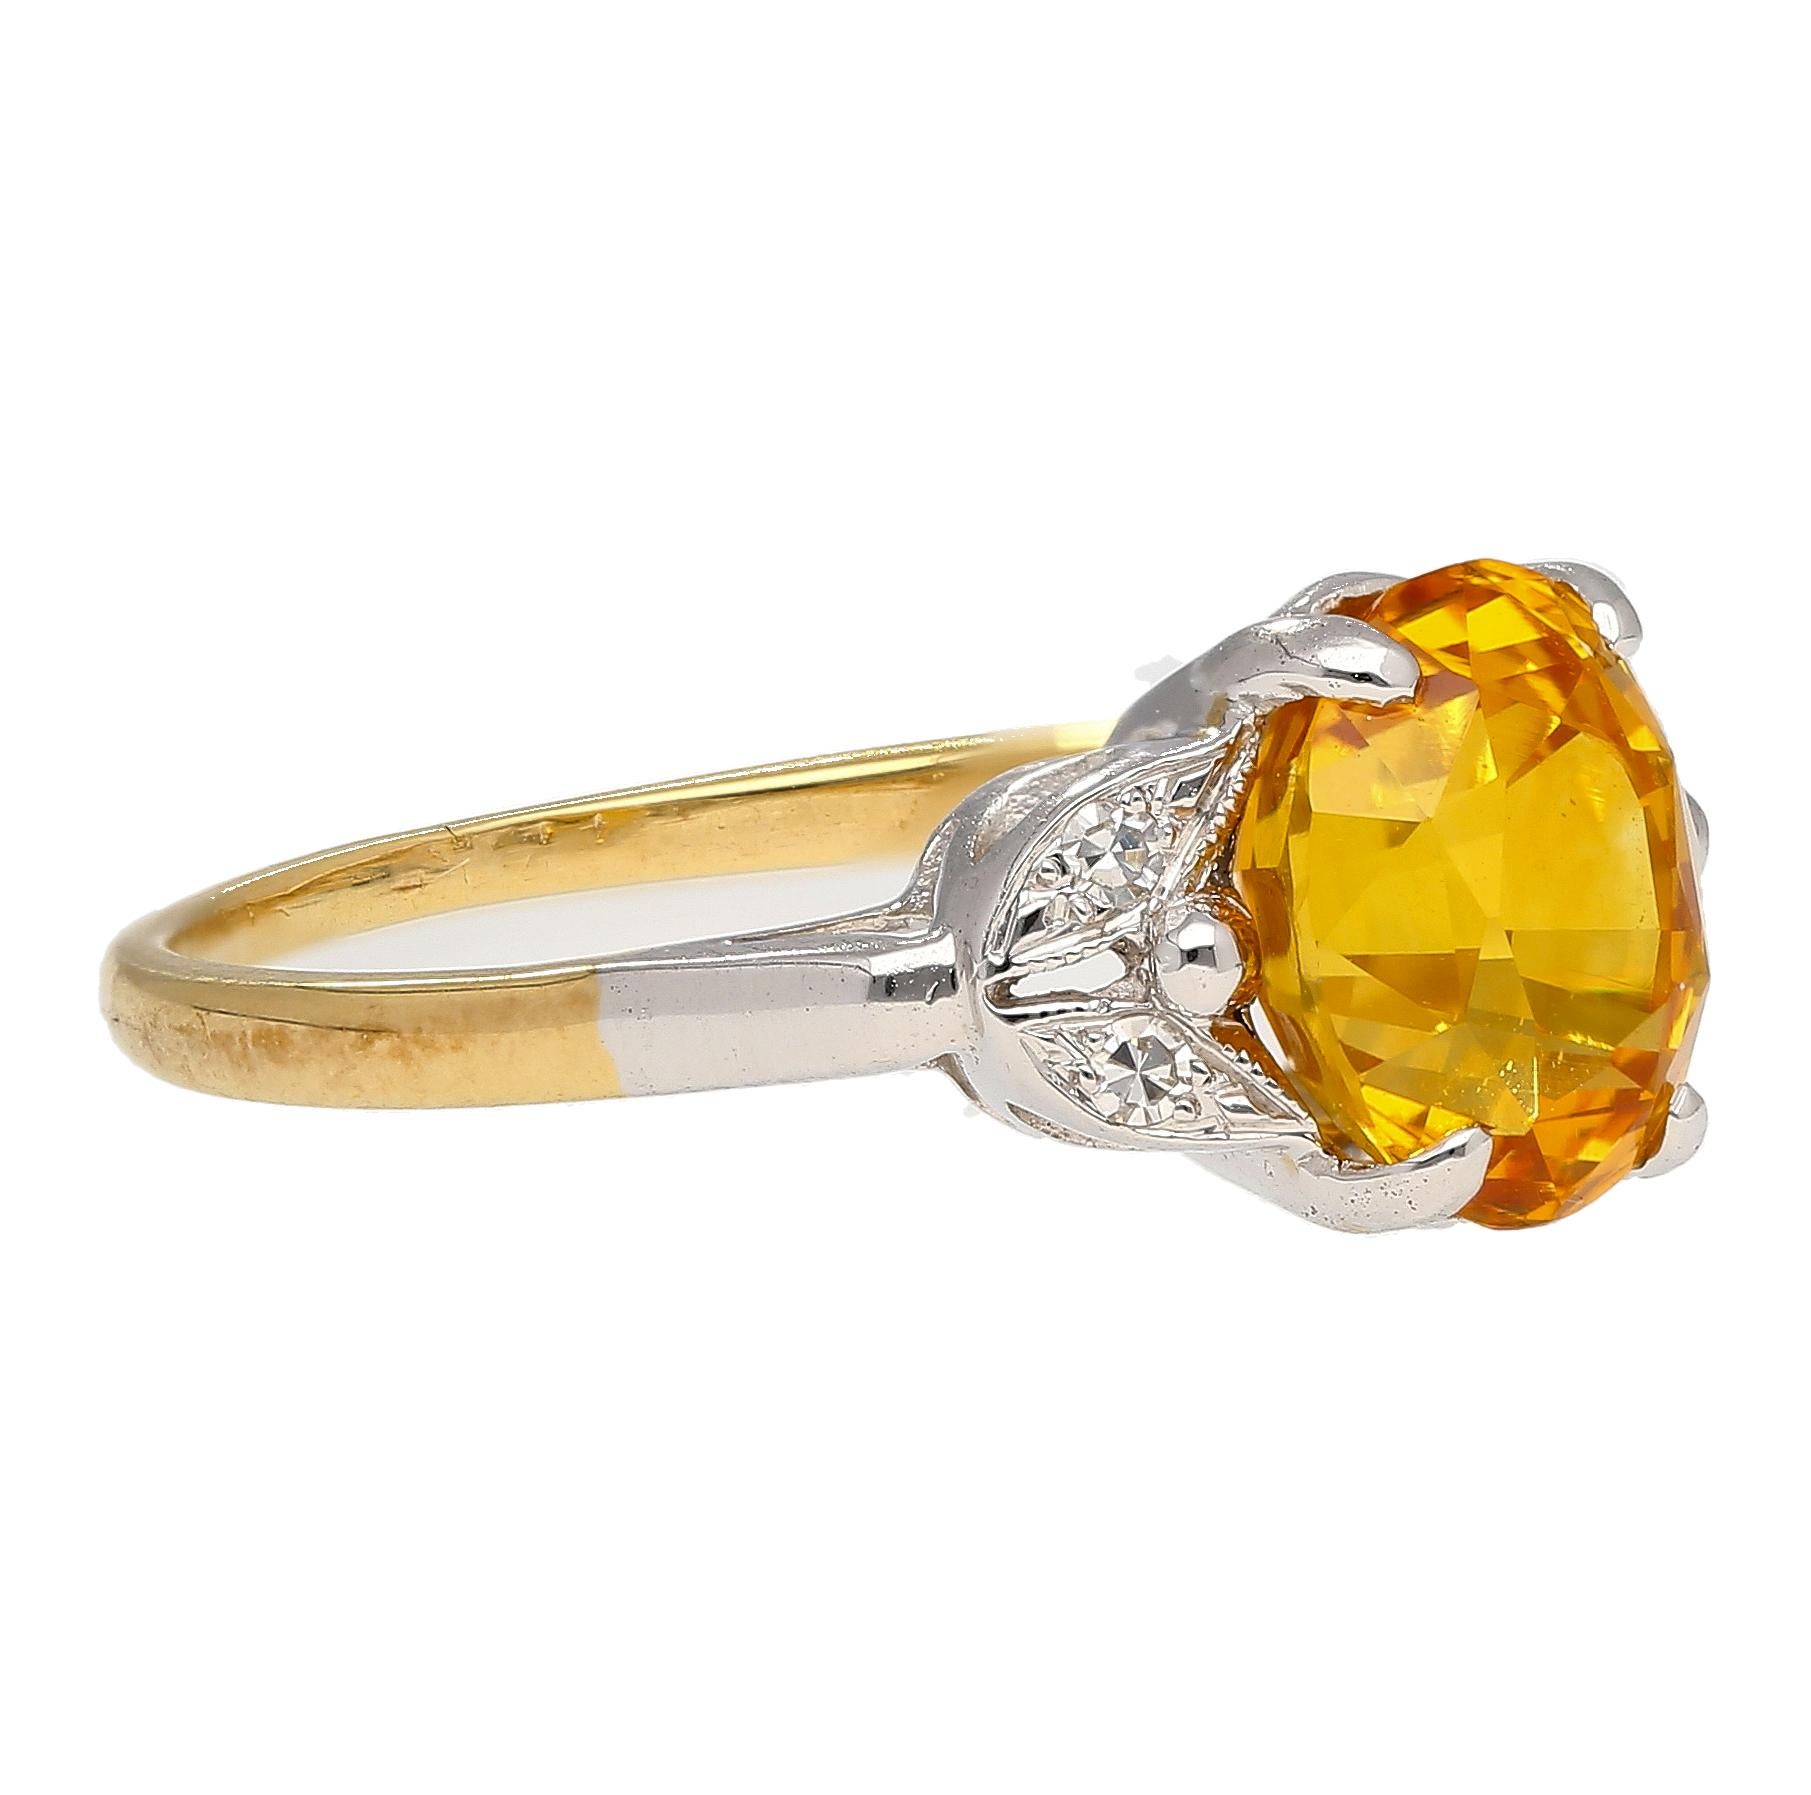 3.06 Ct Oval Yellow Sapphire with Diamonds Sides Ring in Platinum and 14k Gold In New Condition For Sale In Miami, FL